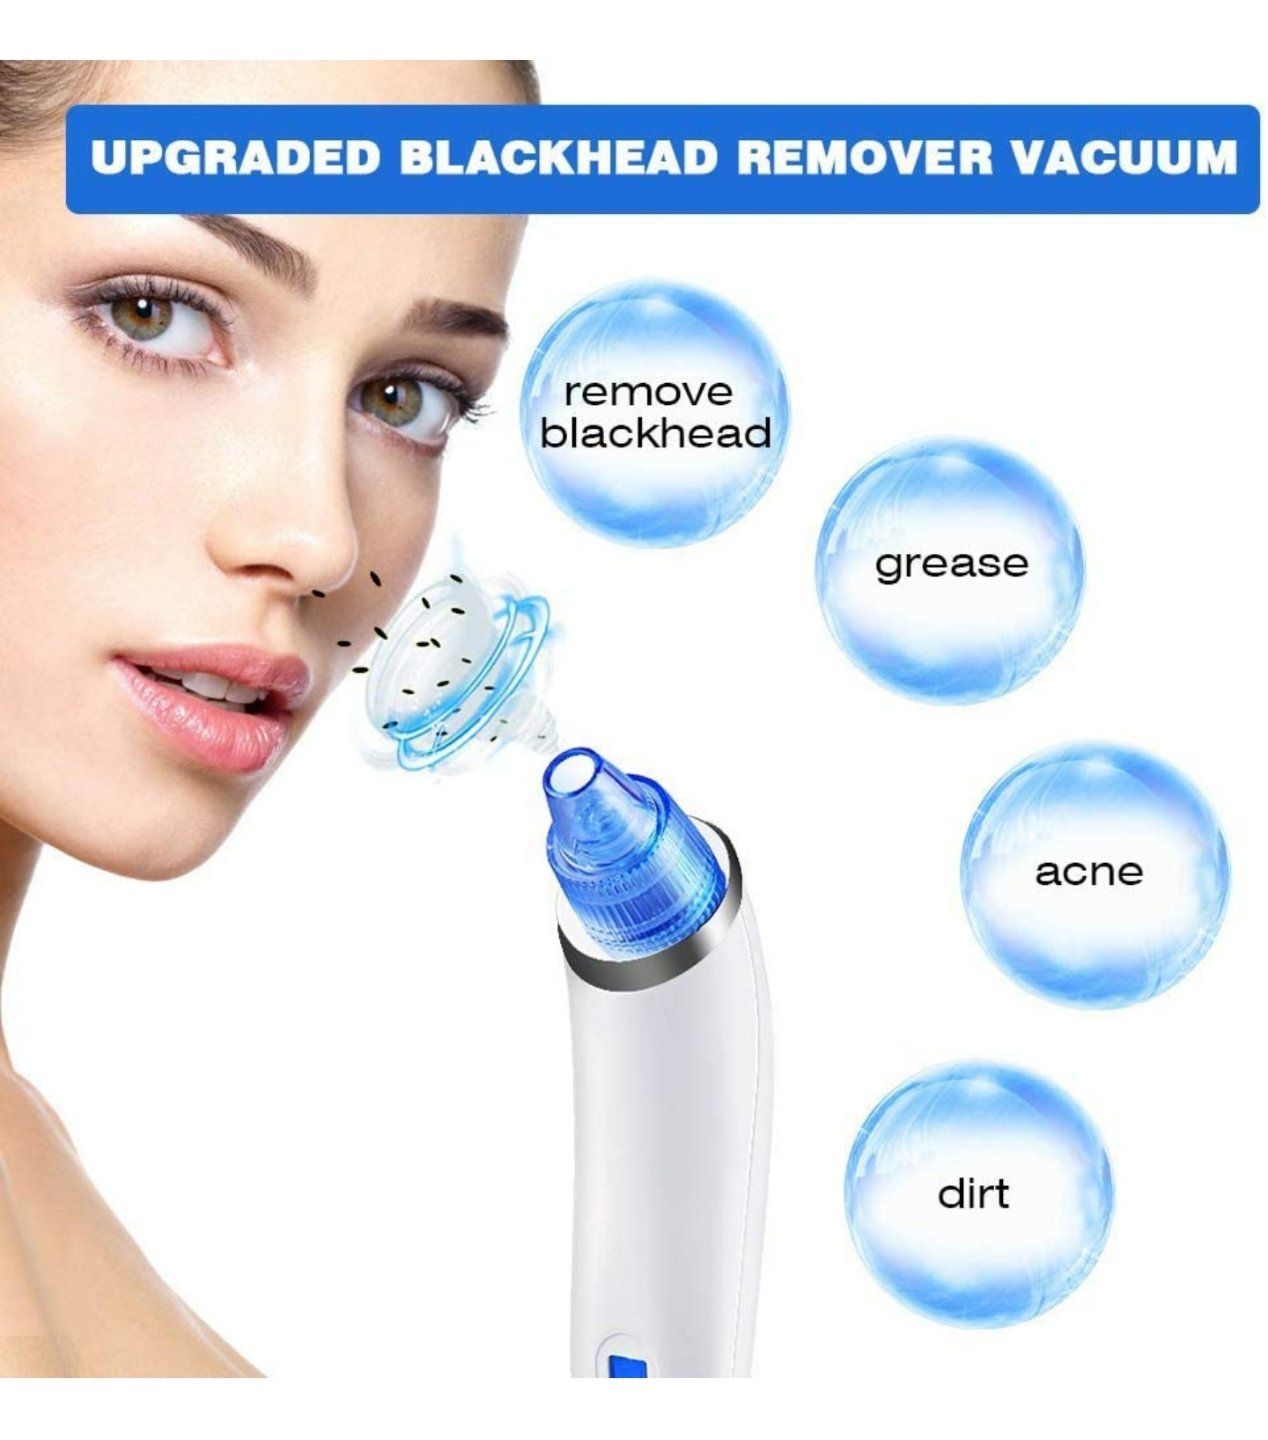 4 in 1 Multi-function Blackhead Remover Tool | Electric Derma suction Machine | Acne Pimple Pore Cleaner Vacuum tools | Facial Cleanser Device for Face, Nose and Skin Care - Derma Suction, Pack Of 1